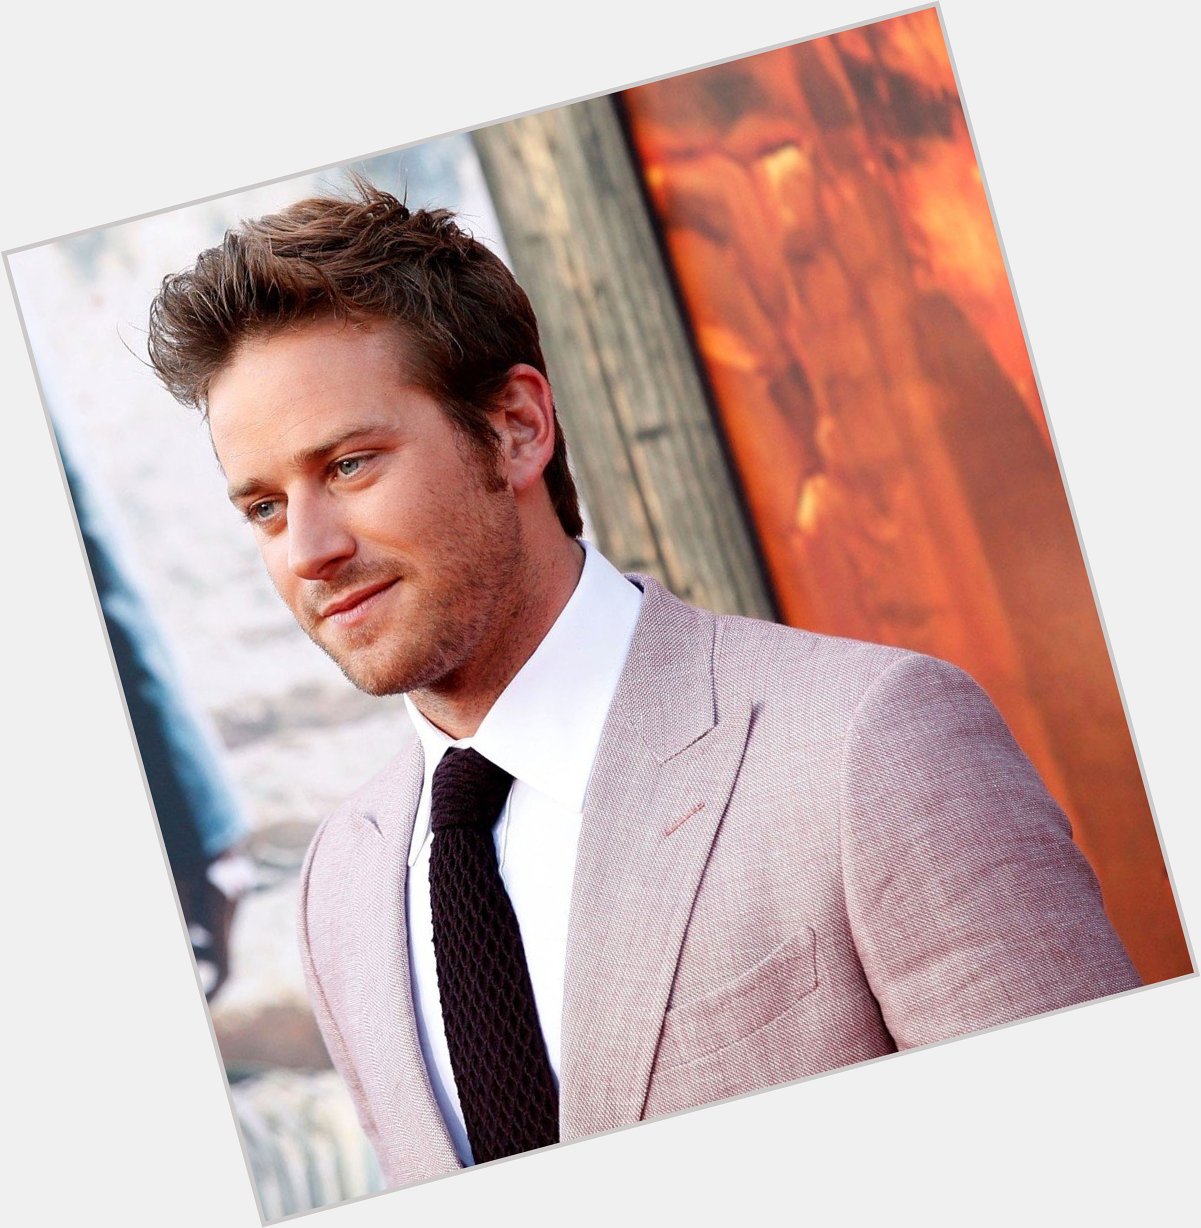 Armand Douglas \"Armie\" Hammer is an American actor.
Happy Birthday, to the Handsome 